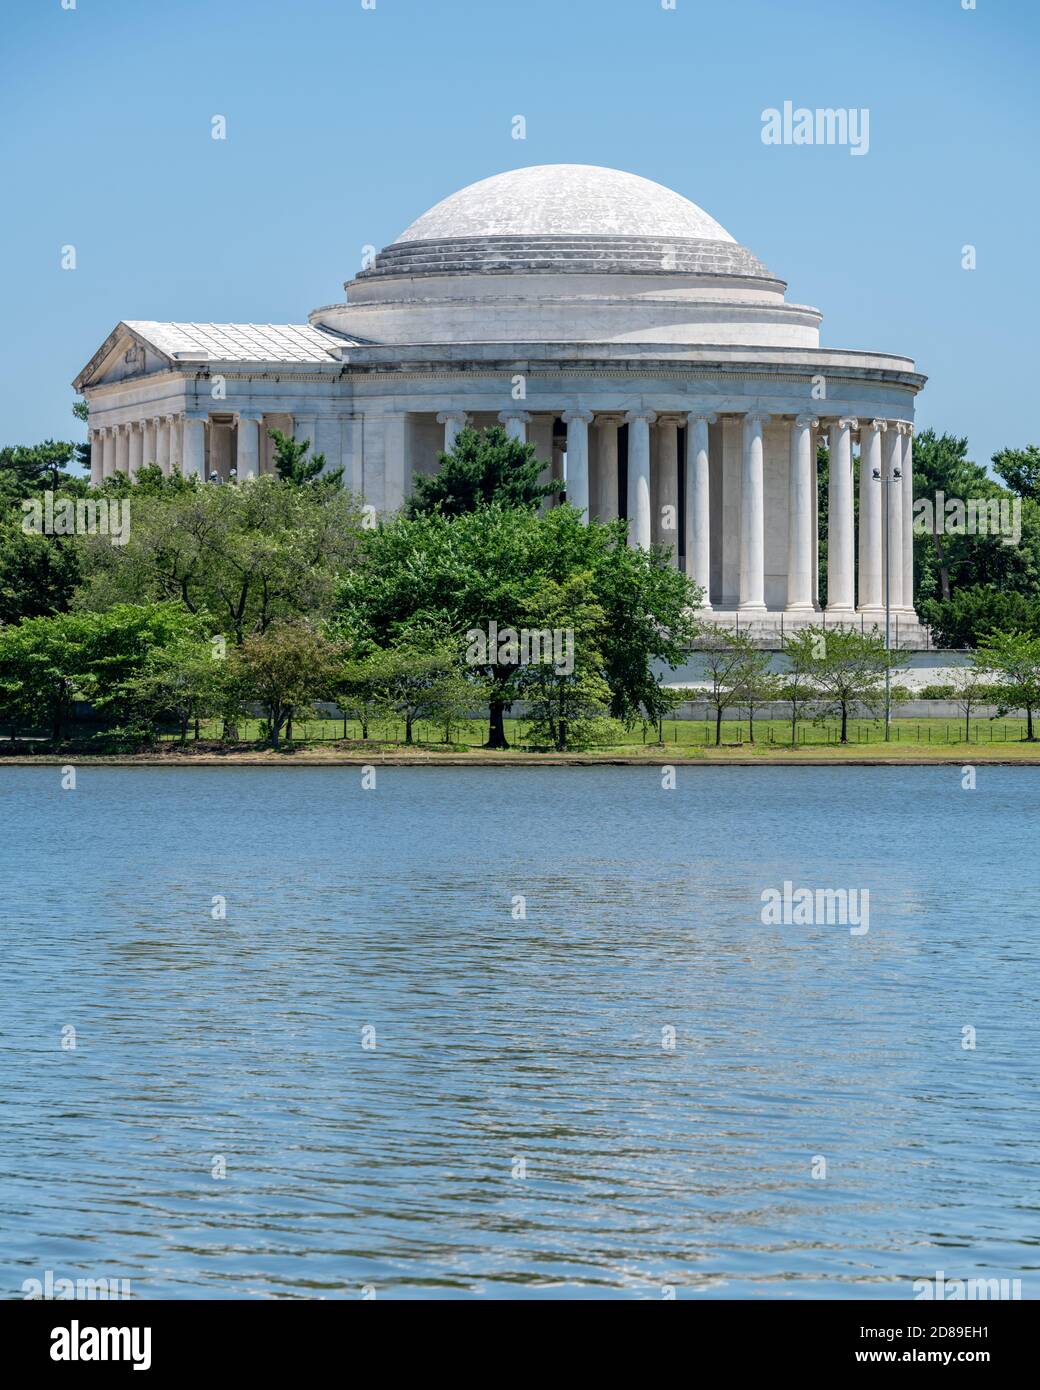 The white marble pantheon of the Jefferson Memorial on the banks of the Potomac Tidal Basin in Washington DC Stock Photo